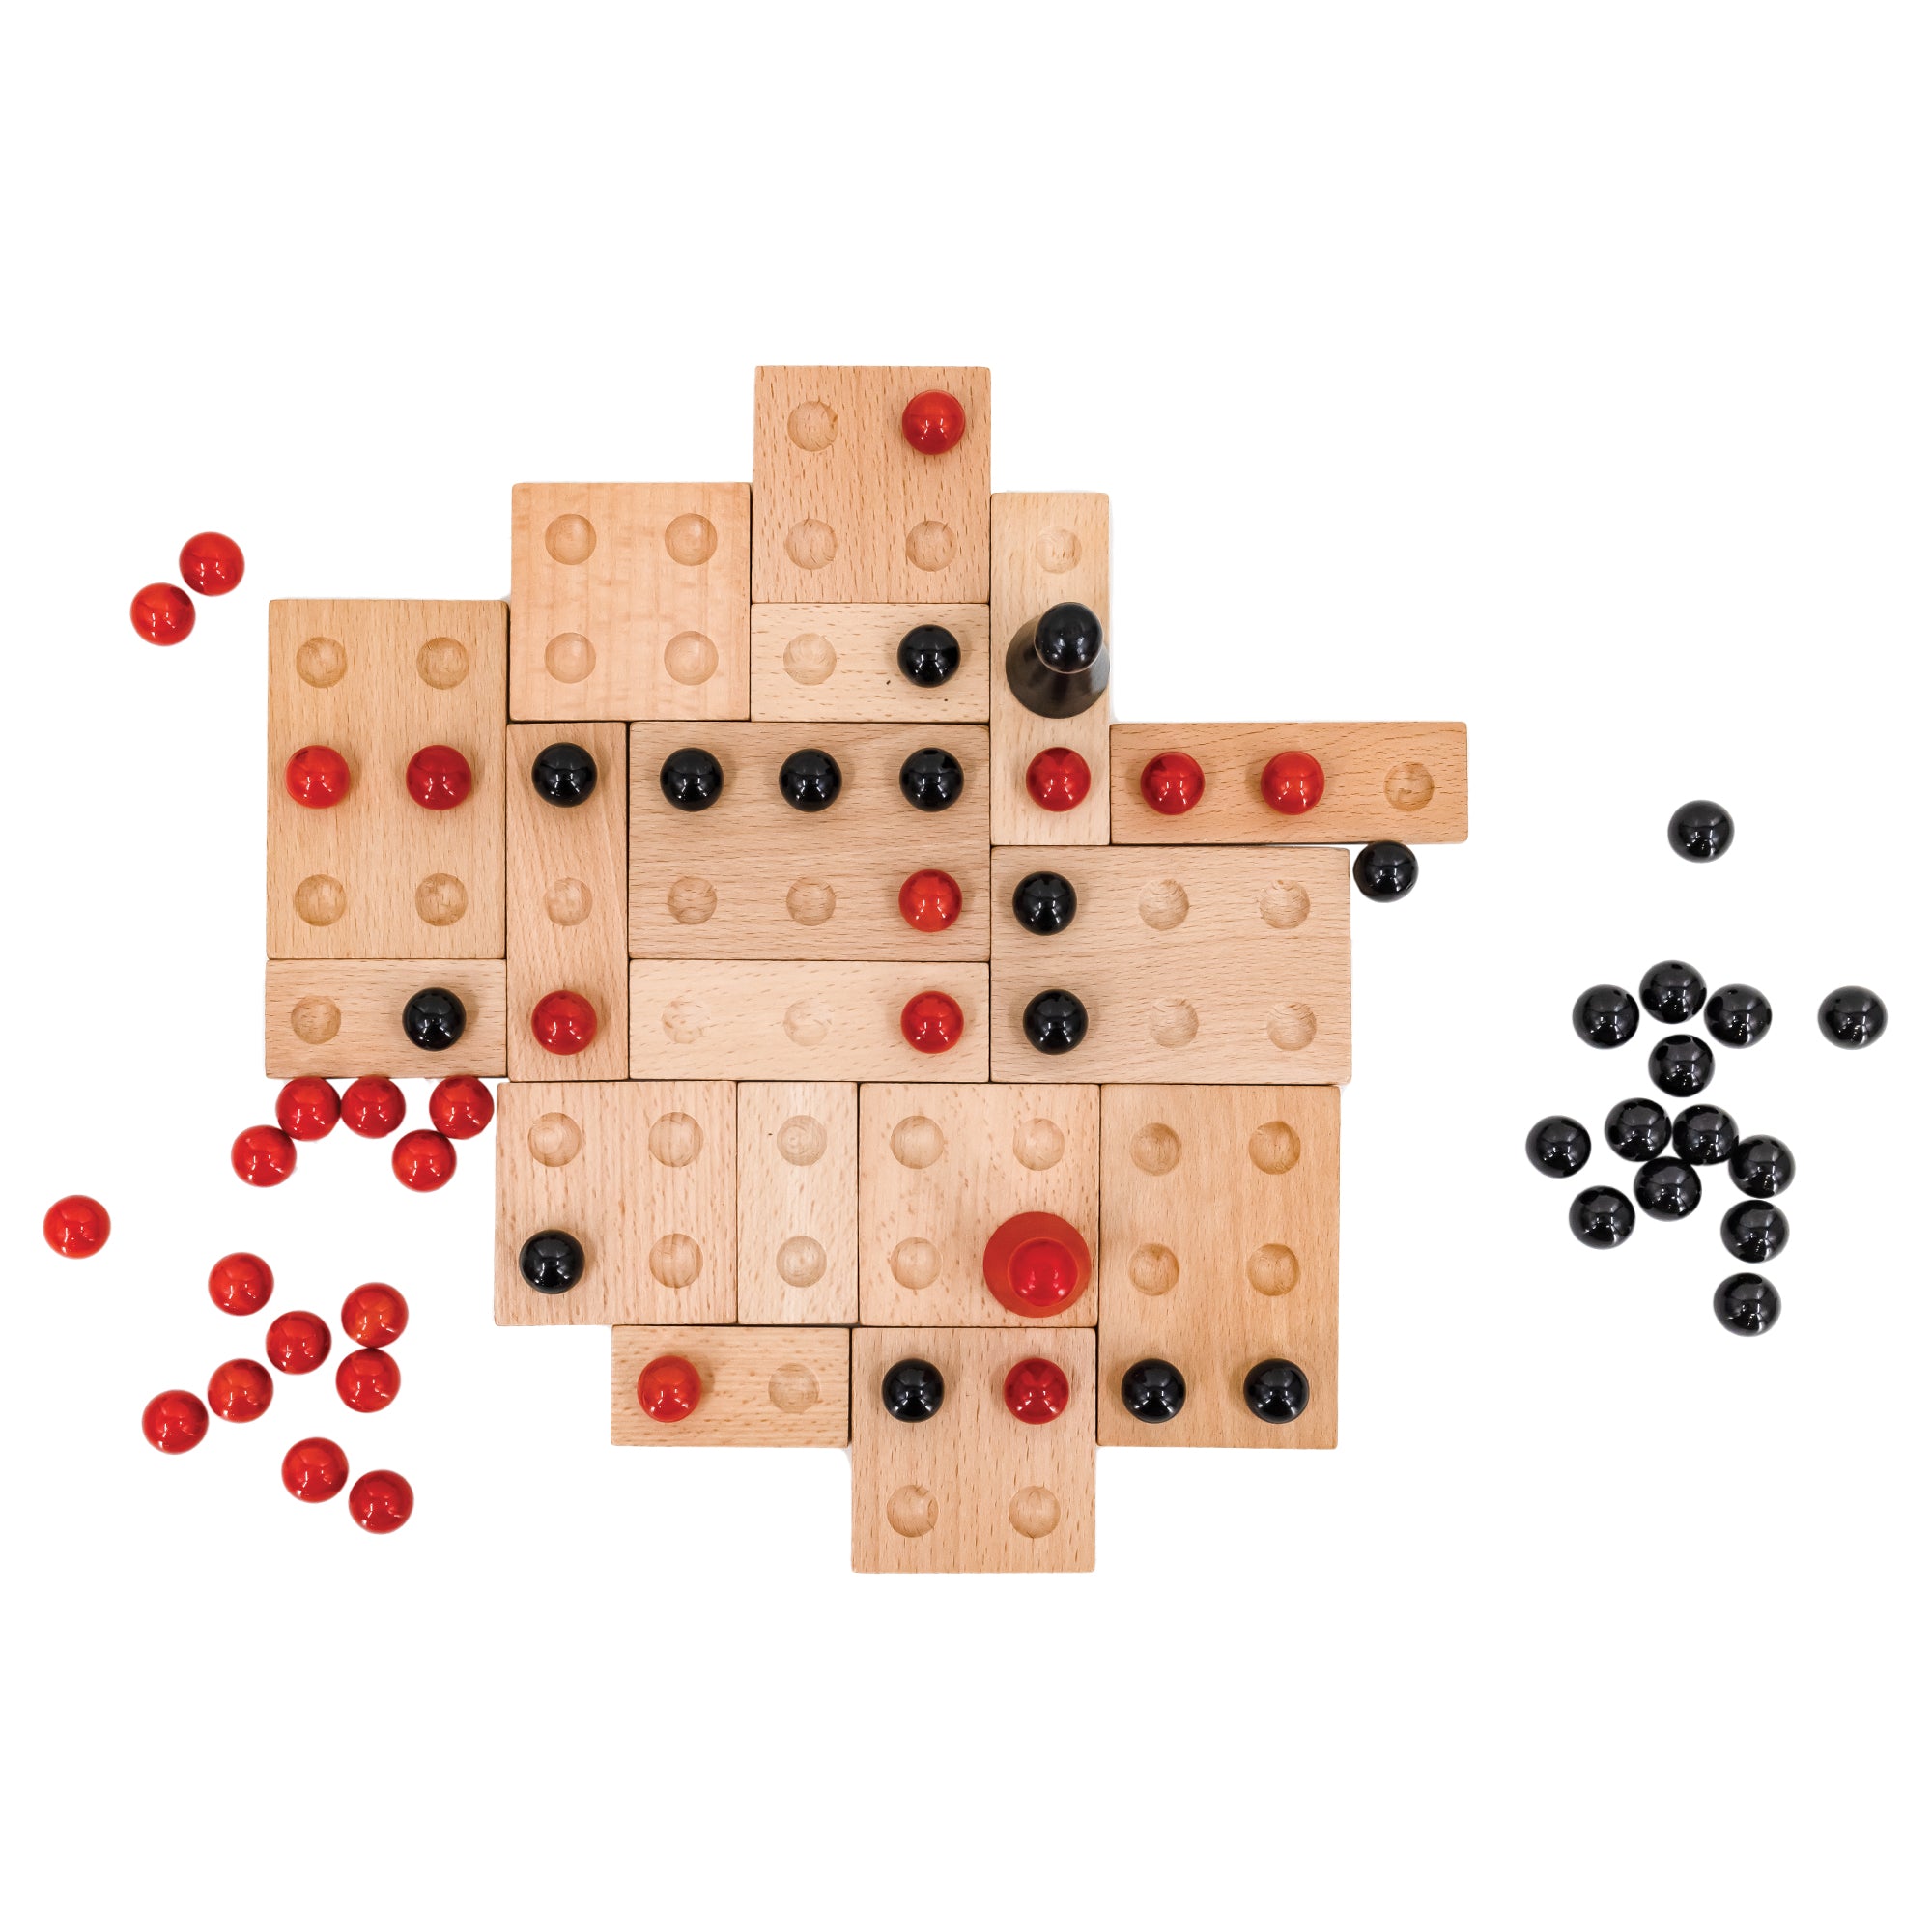 Top view of the Kulami game in play. There are many square and rectangle wood pieces with divots to place black and red marbles. The wood pieces are placed randomly against each other for form a gapless board. The marbles are randomly placed on top with 2, larger, cone-shaped pieces with a rounded top in the middle; 1 red, and 1 black. There is a pile of black marbles off to the right of the board and a pile of red marbles off to the left of the board.